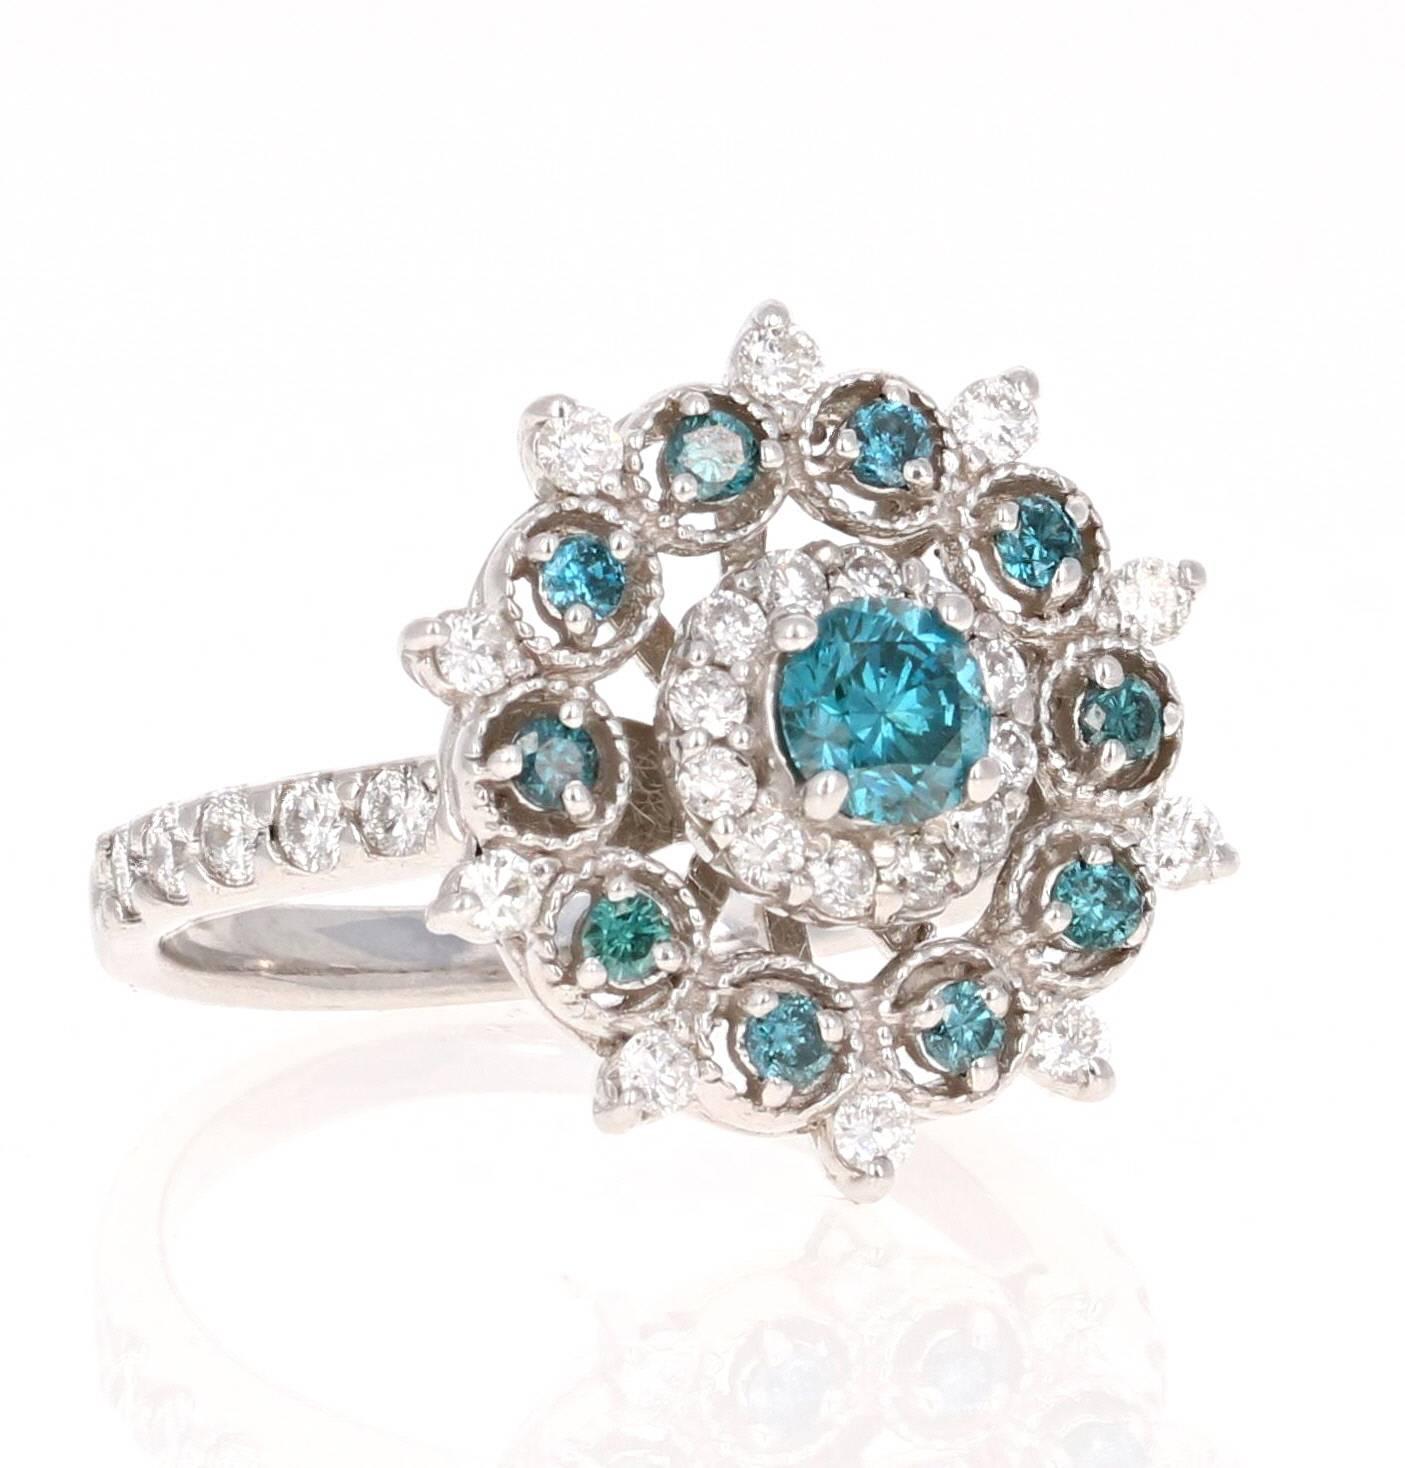 A gorgeous and intricate designed ring!  This pretty blue diamond cocktail ring can be a great addition to your jewelry collection.  The ring has 11 Blue Round Cut Diamonds that weigh 0.64 carats and 32 White Round Cut Diamonds that weigh 0.70